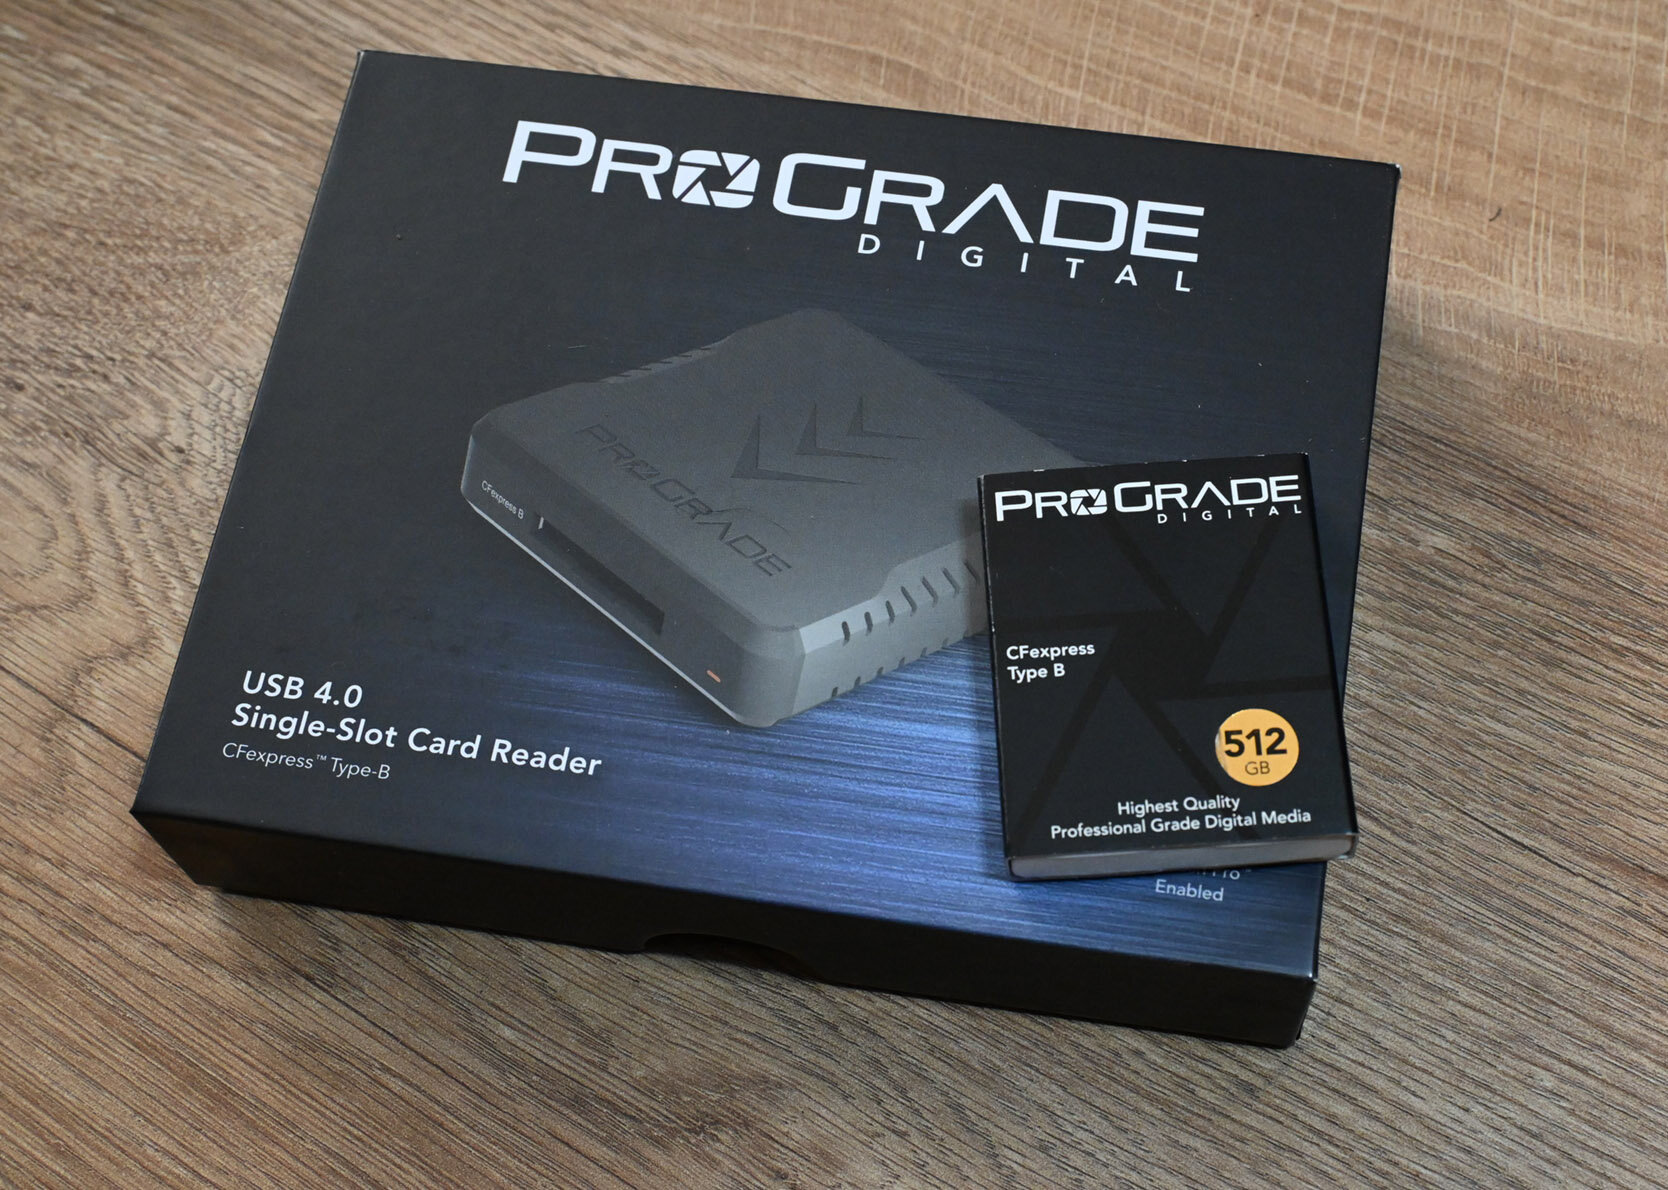 More information about "ProGrade CFexpress Gold CF4 512 GB e lettore USB 4.0 PG05.6"